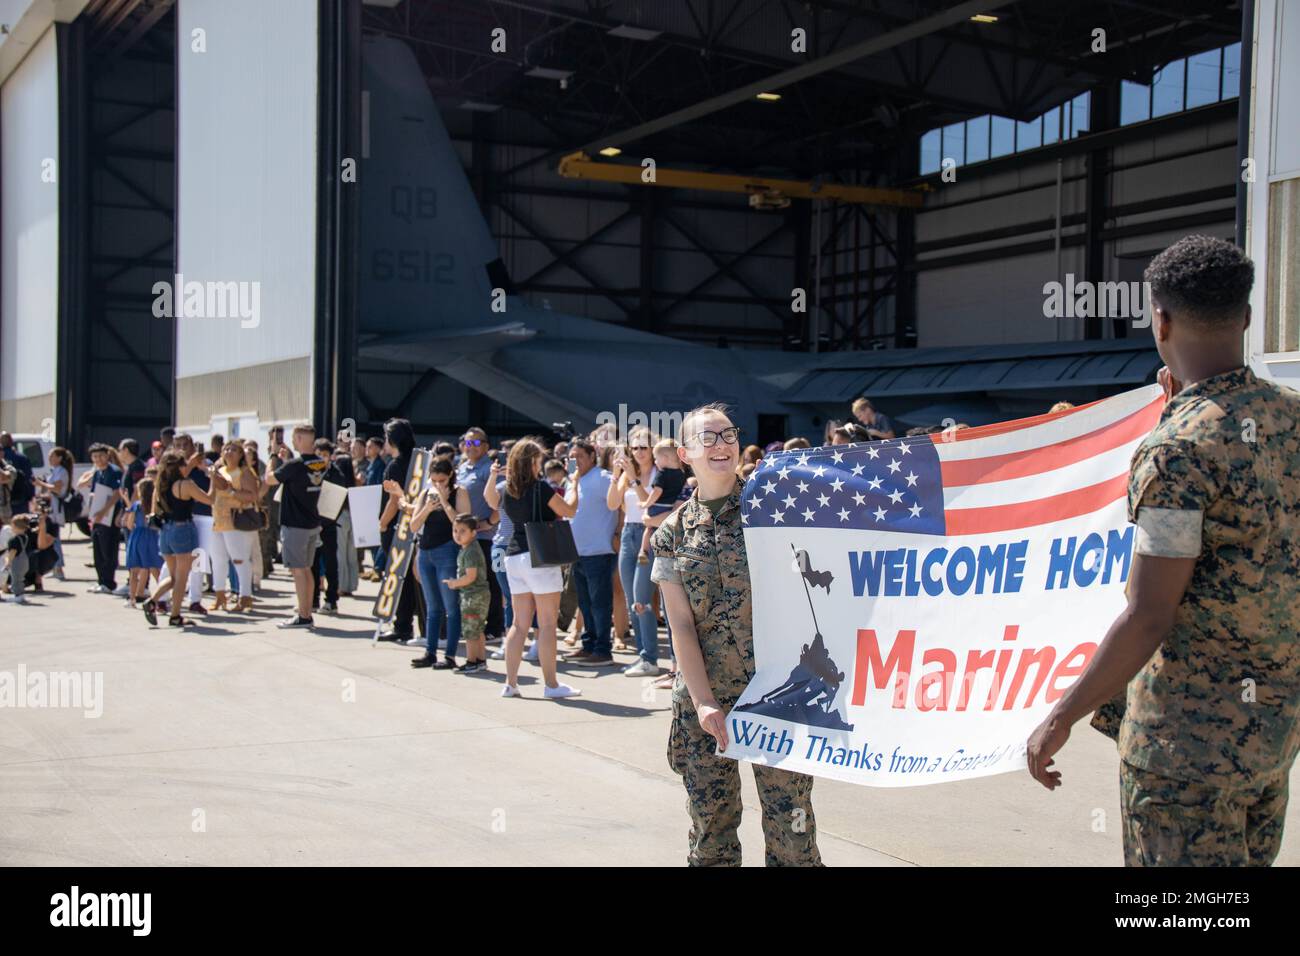 Friends and families of Marine Aerial Refueler Transport Squadron 352, Marine Aircraft Group 11, 3rd Marine Aircraft Wing, gather to welcome their Marines home after a deployment with Combined Joint Task Force-Horn of Africa, on MCAS Miramar, California, Aug. 22, 2022. The deployment was a successful integration of elements of three Fleet Marine Force squadrons to provide critical rapid personnel recovery and medical evacuation capabilities to U.S. and partner forces operating in East Africa. Stock Photo